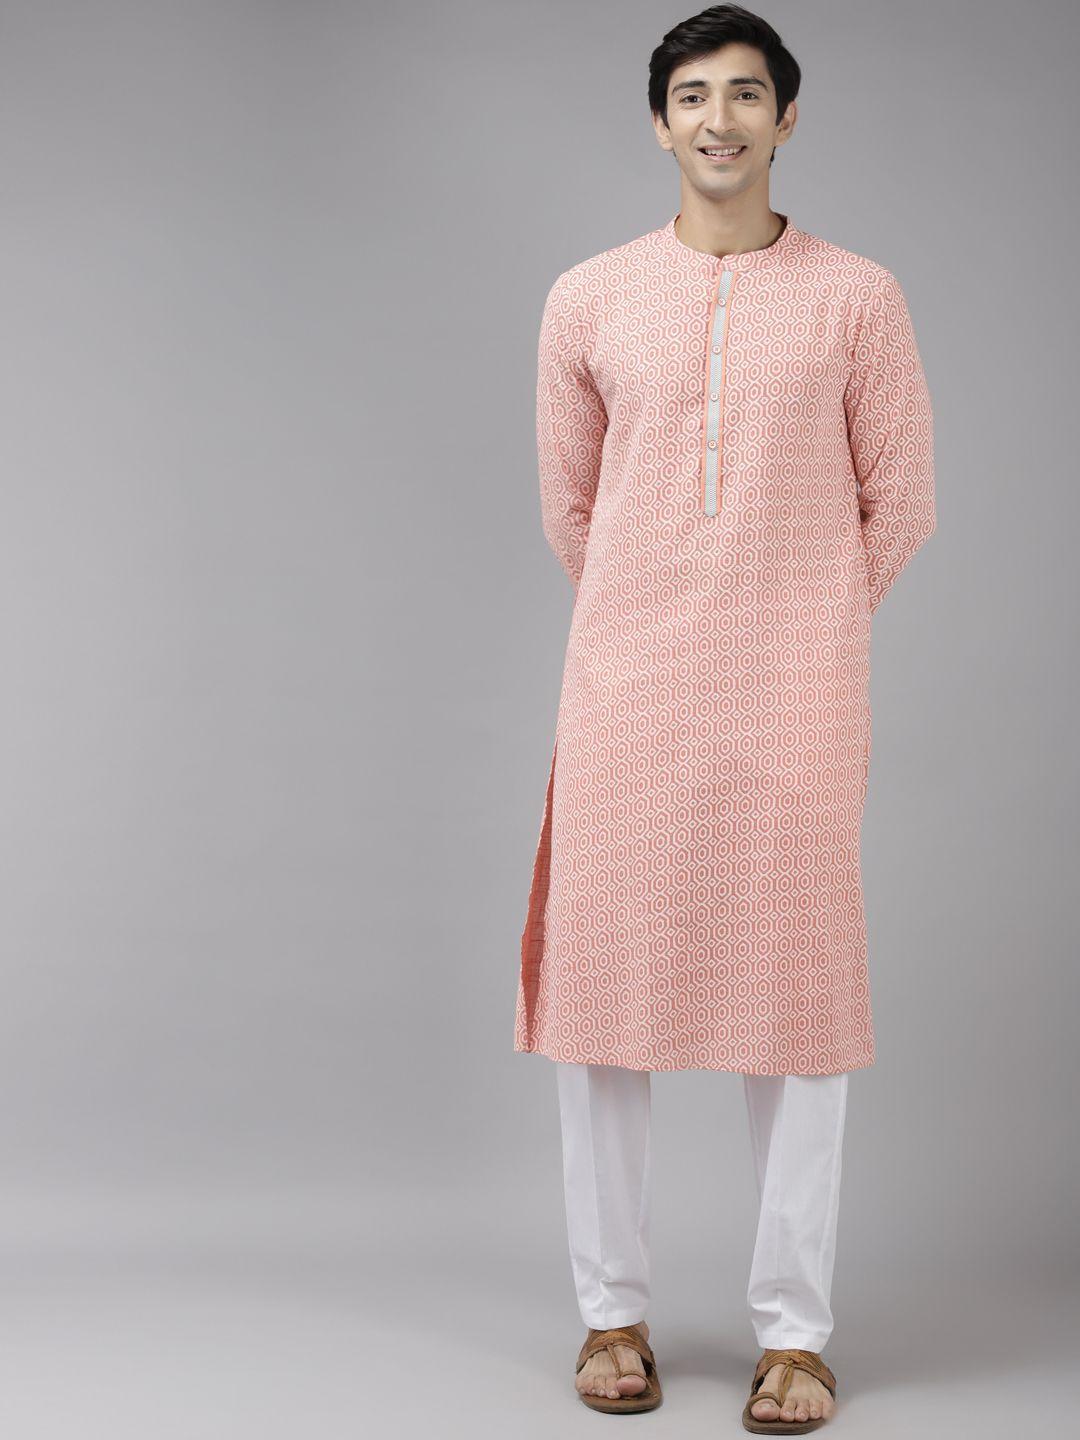 see designs men peach-coloured printed pure cotton kurta with trousers